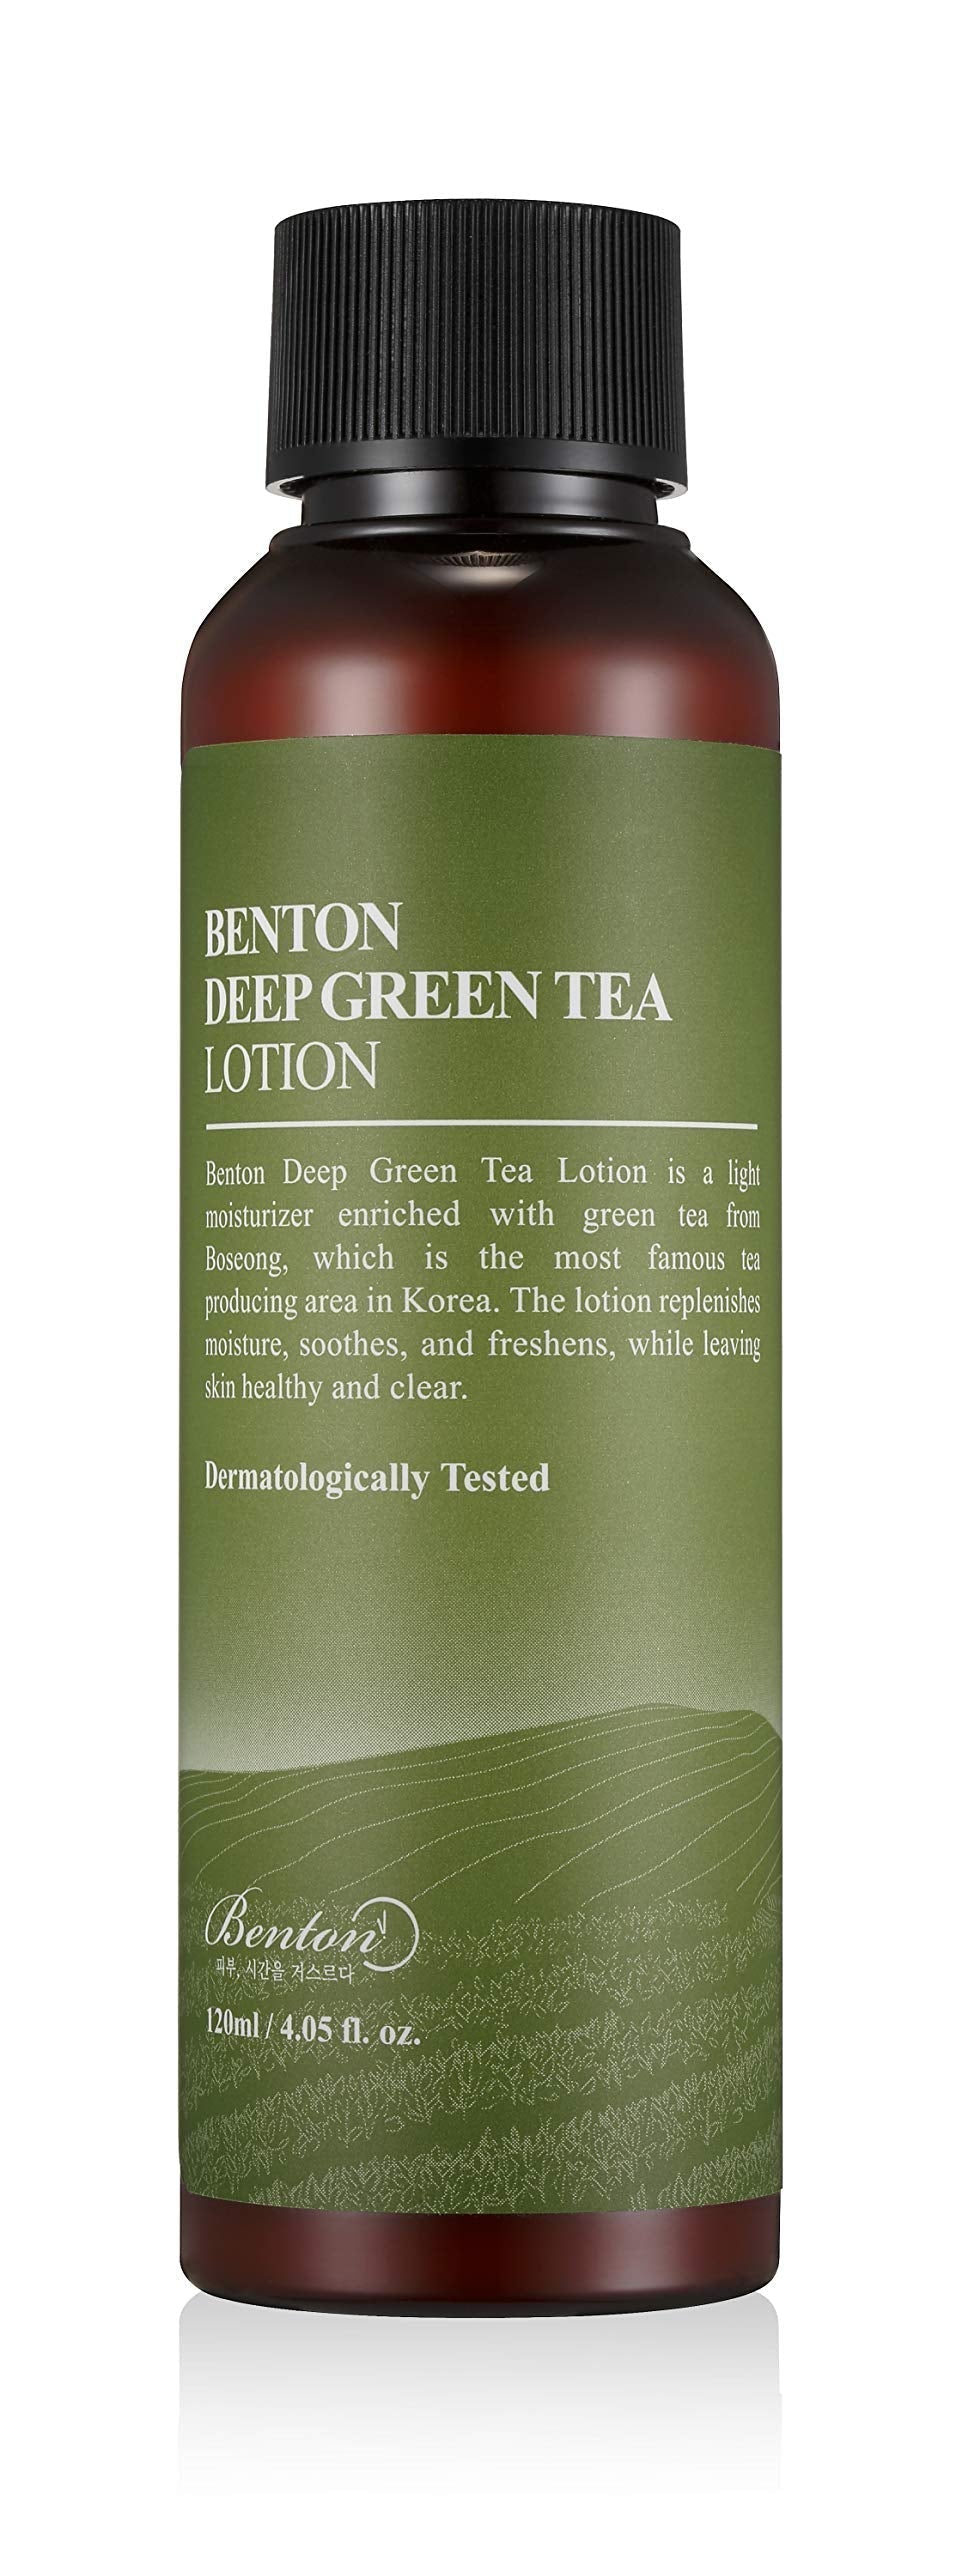 [Australia] - BENTON Deep Green Tea Lotion 120ml (4.05 fl.oz.) - Nourishing & Hydrating Facial Lotion without Oiliness for Oily and Sensitive Skin, Skin Soothing & Refreshing 